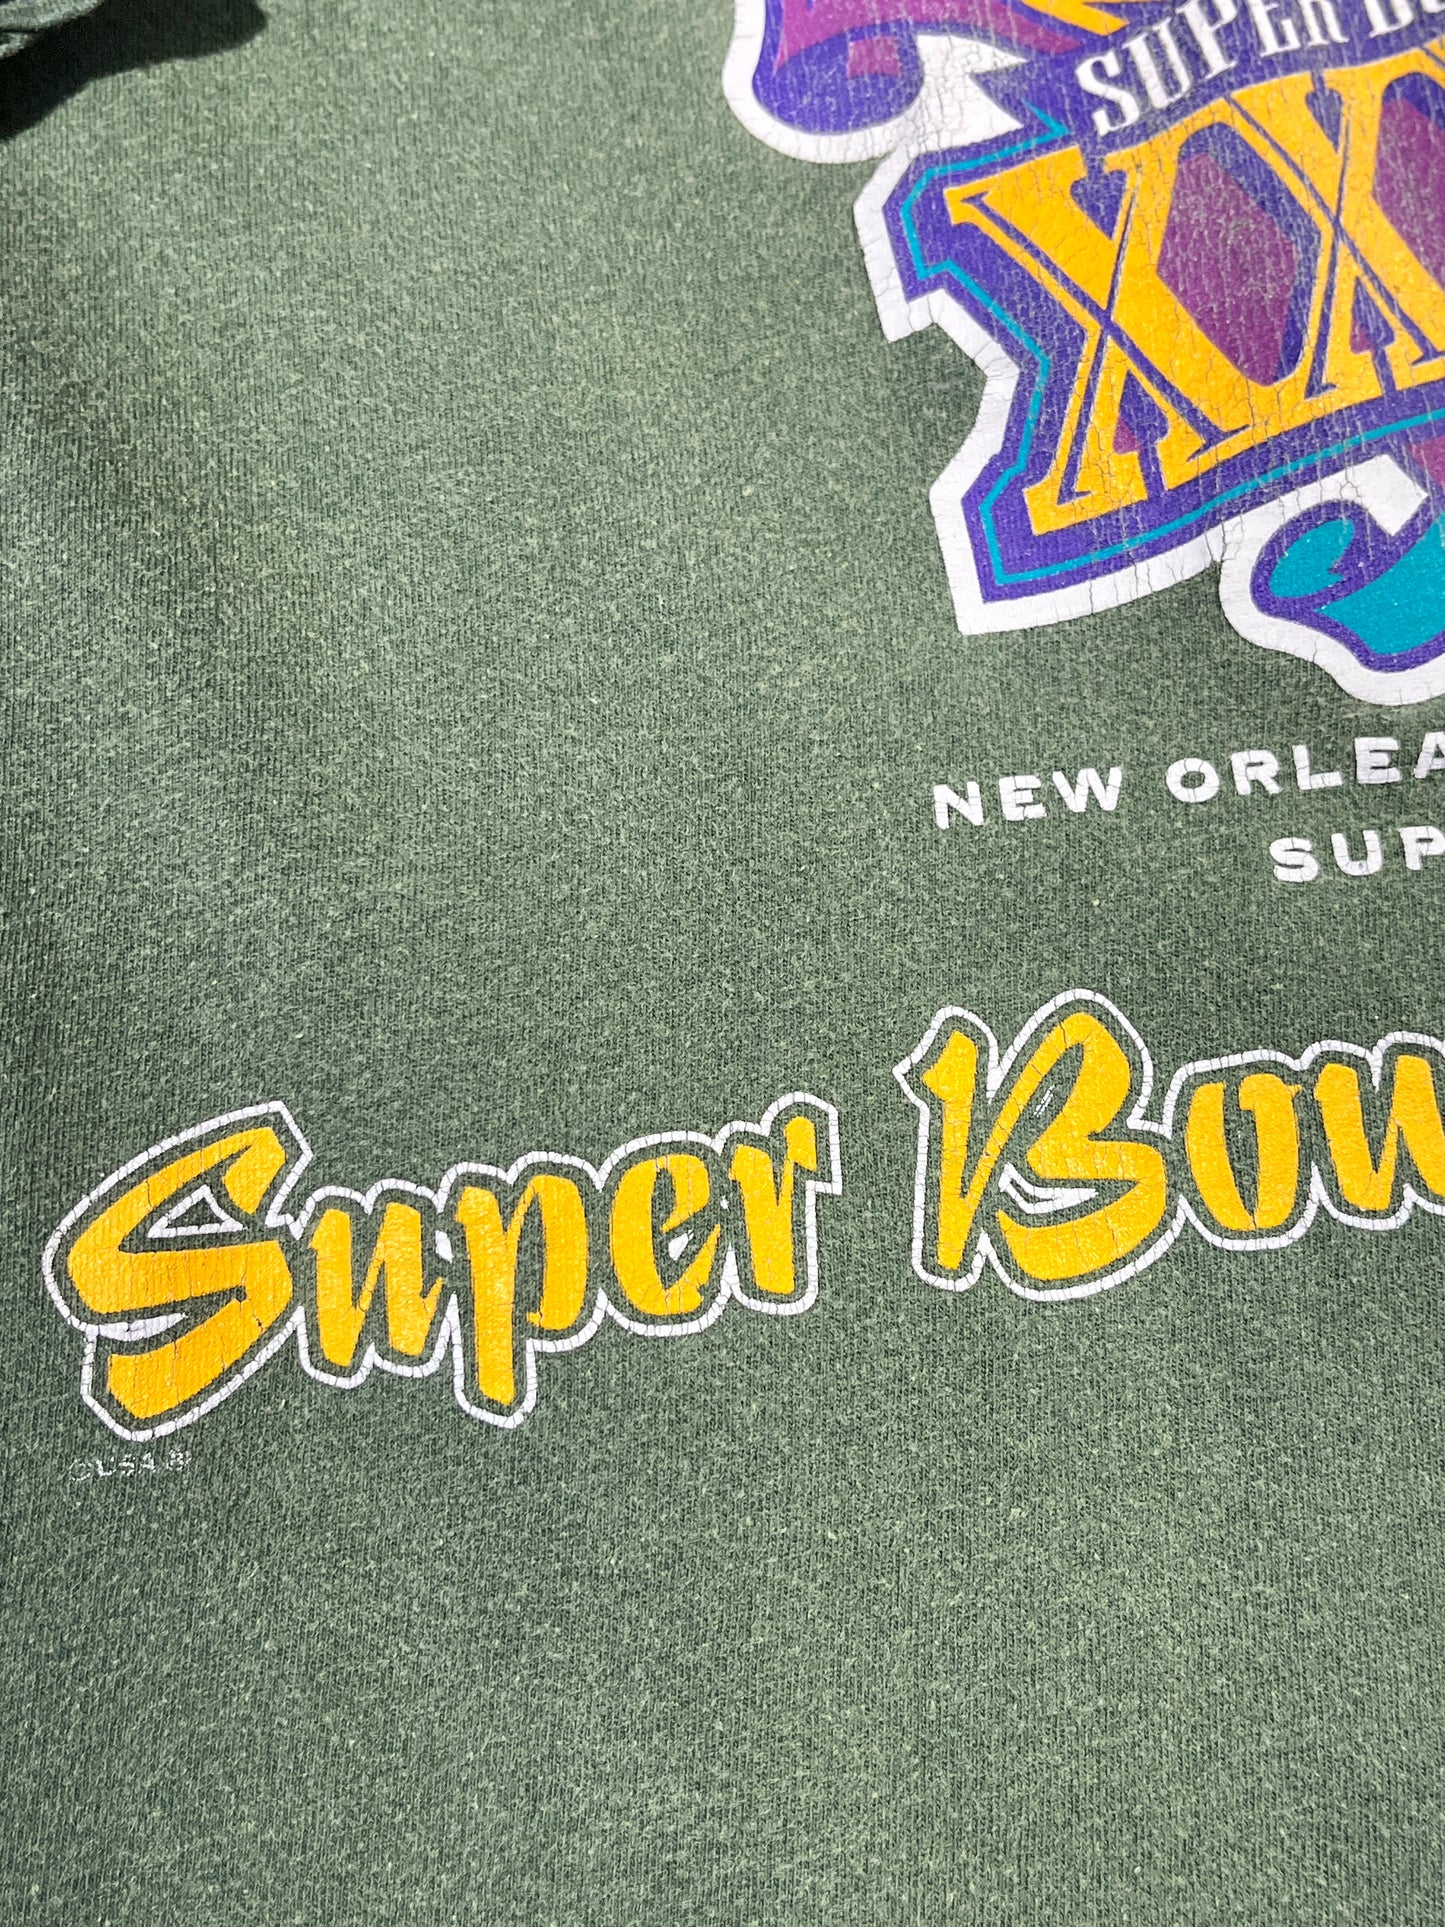 Vintage Green Bay Packers T-Shirt 1997 Super Bowl Champions XXXI 90's NFL